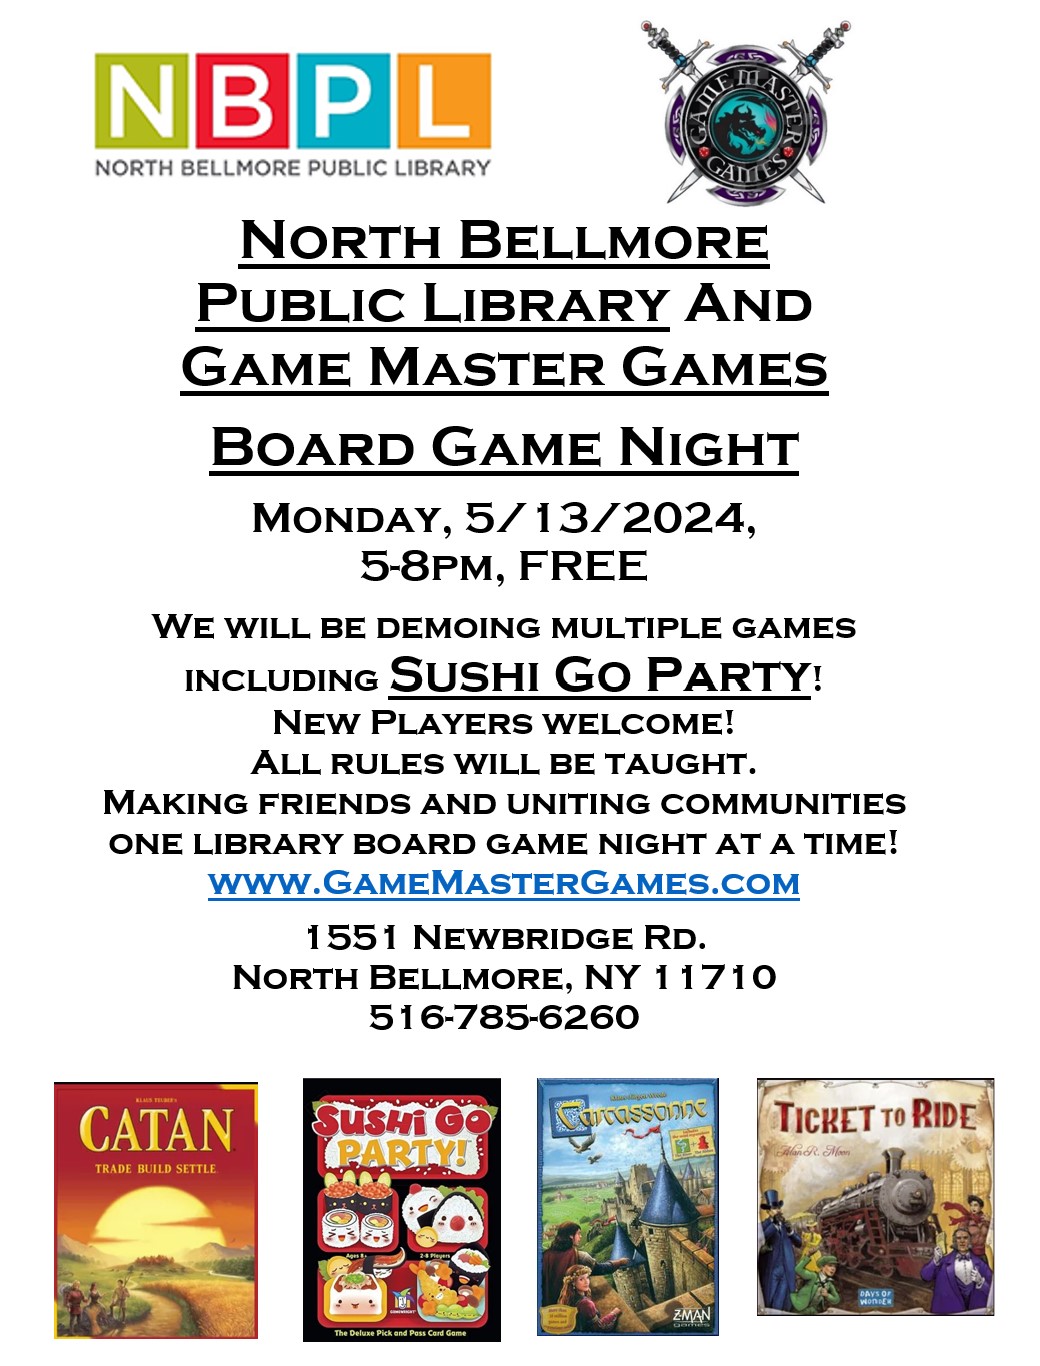 Board Game Night at the North Bellmore Library!  Have fun and make some new friends!